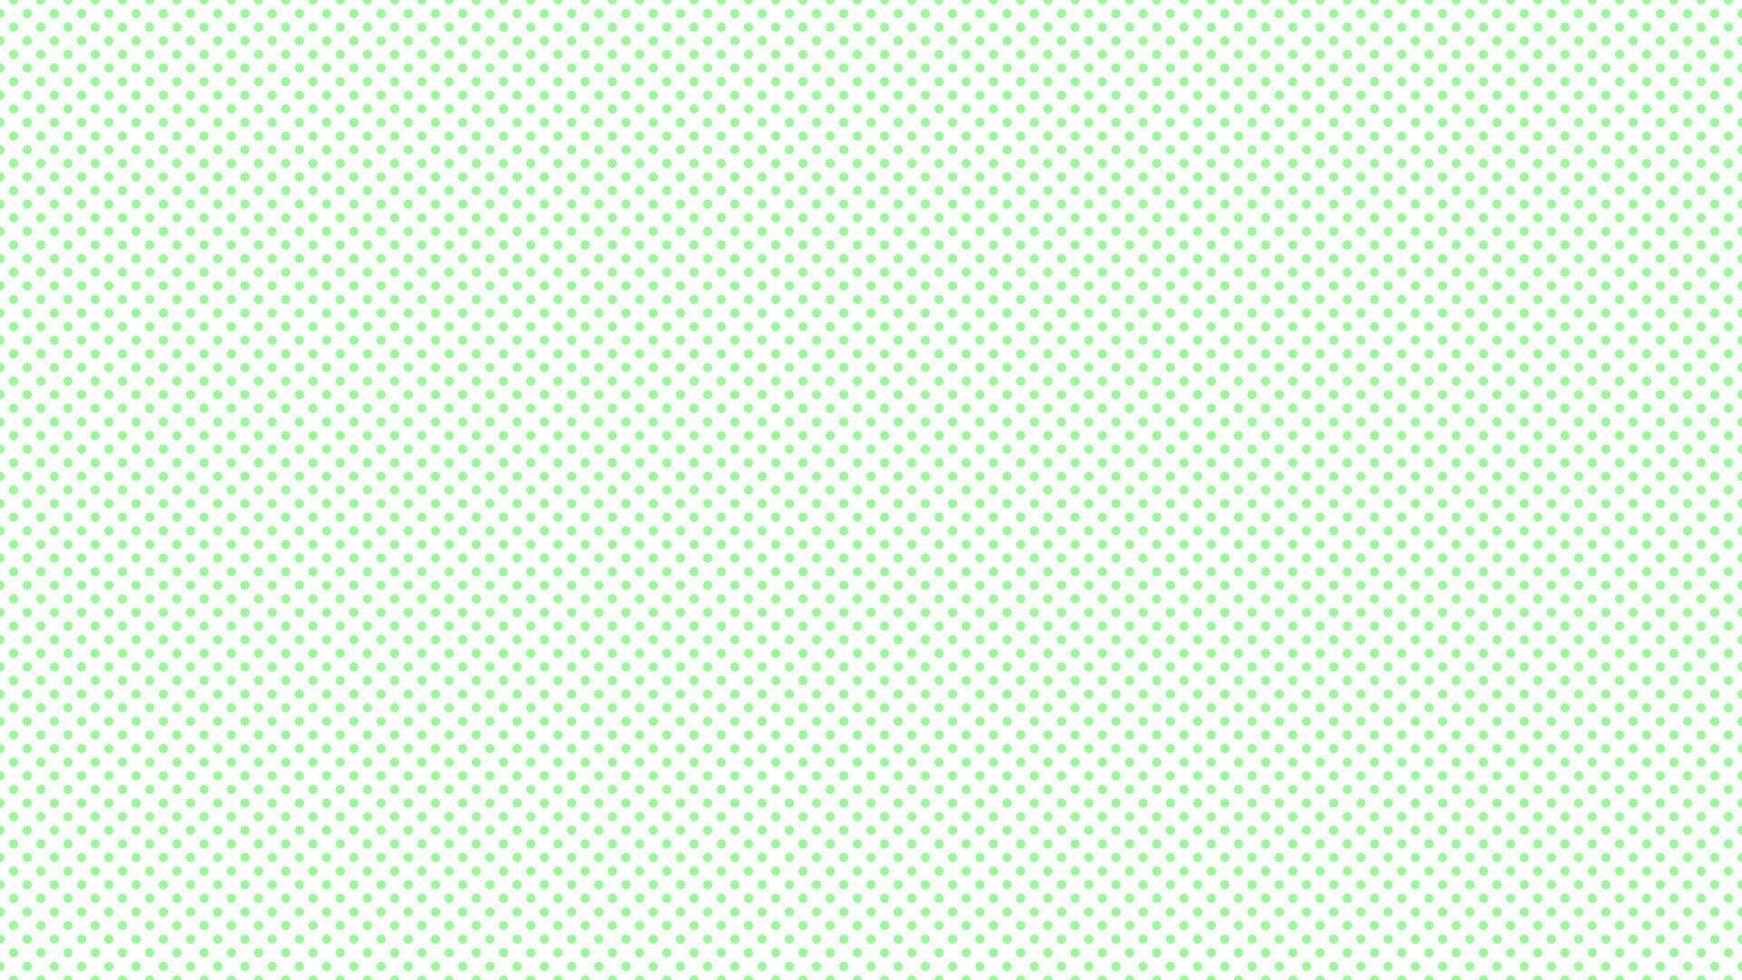 pale green color polka dots background vector